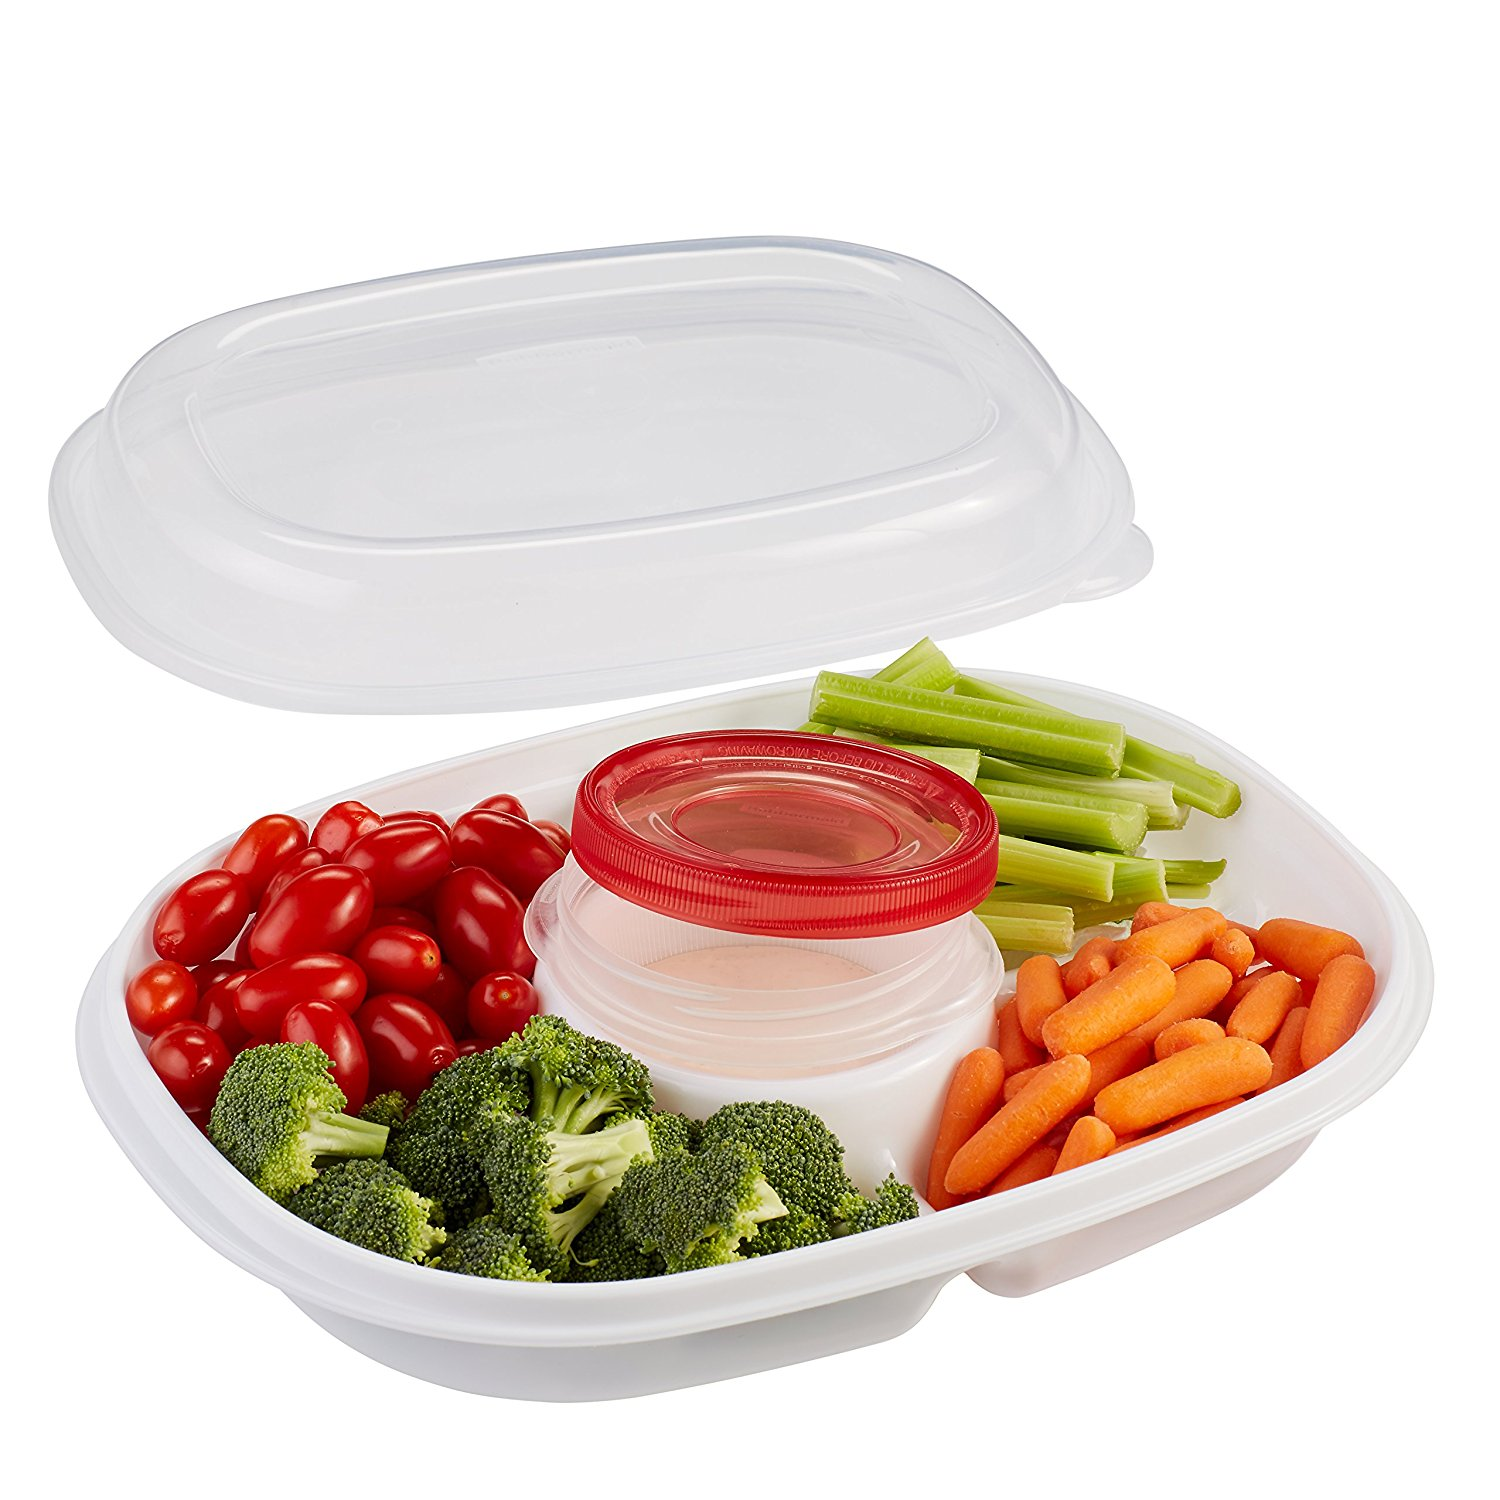 Rubbermaid Party Platter Only $5.48!